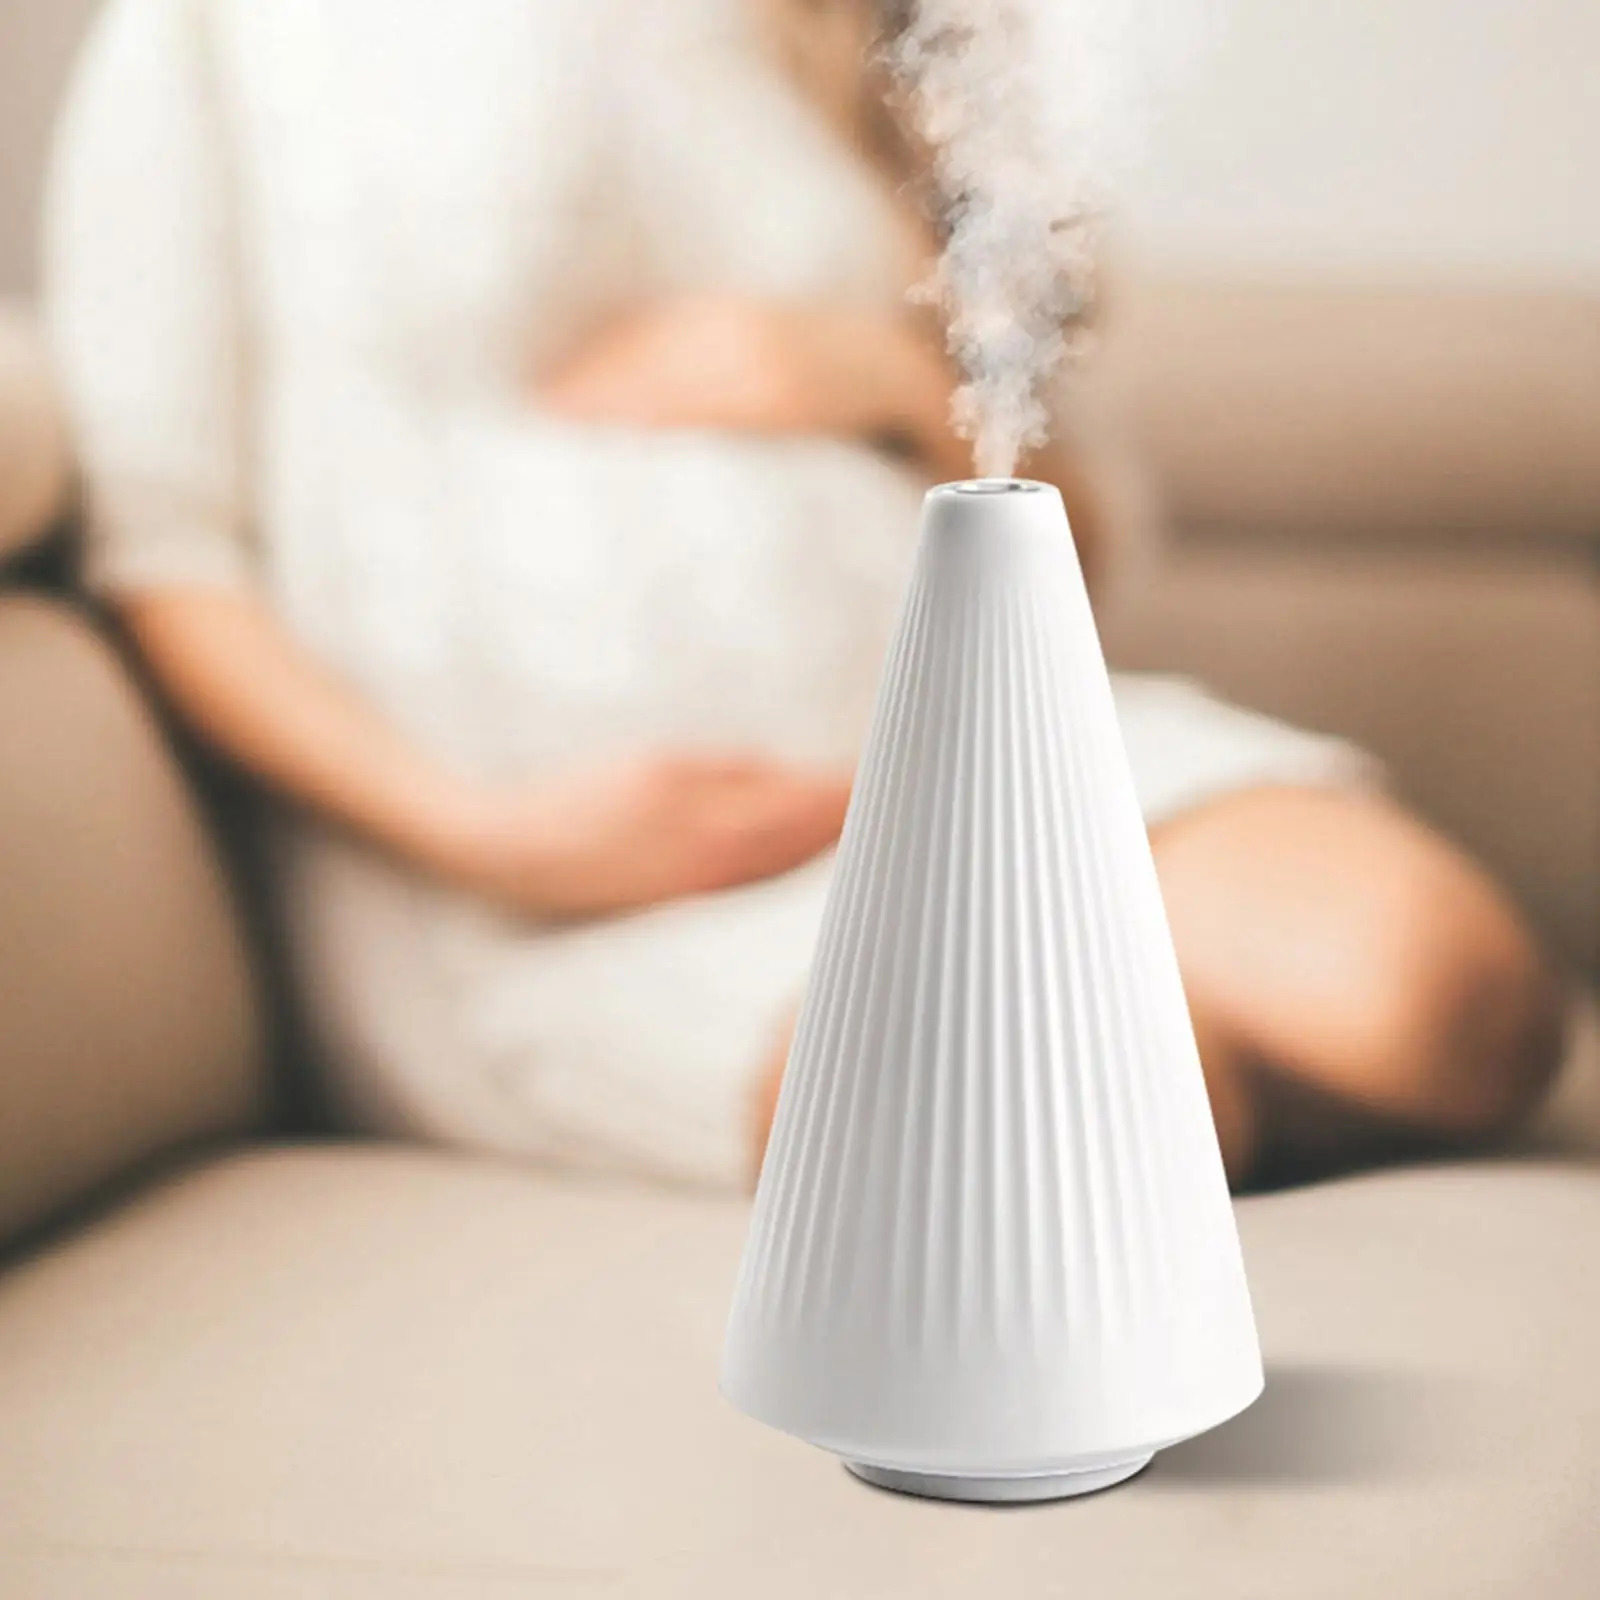 USB Humidifier Aroma Diffuser Touch Control Cool Mist for Bedroom Office Car